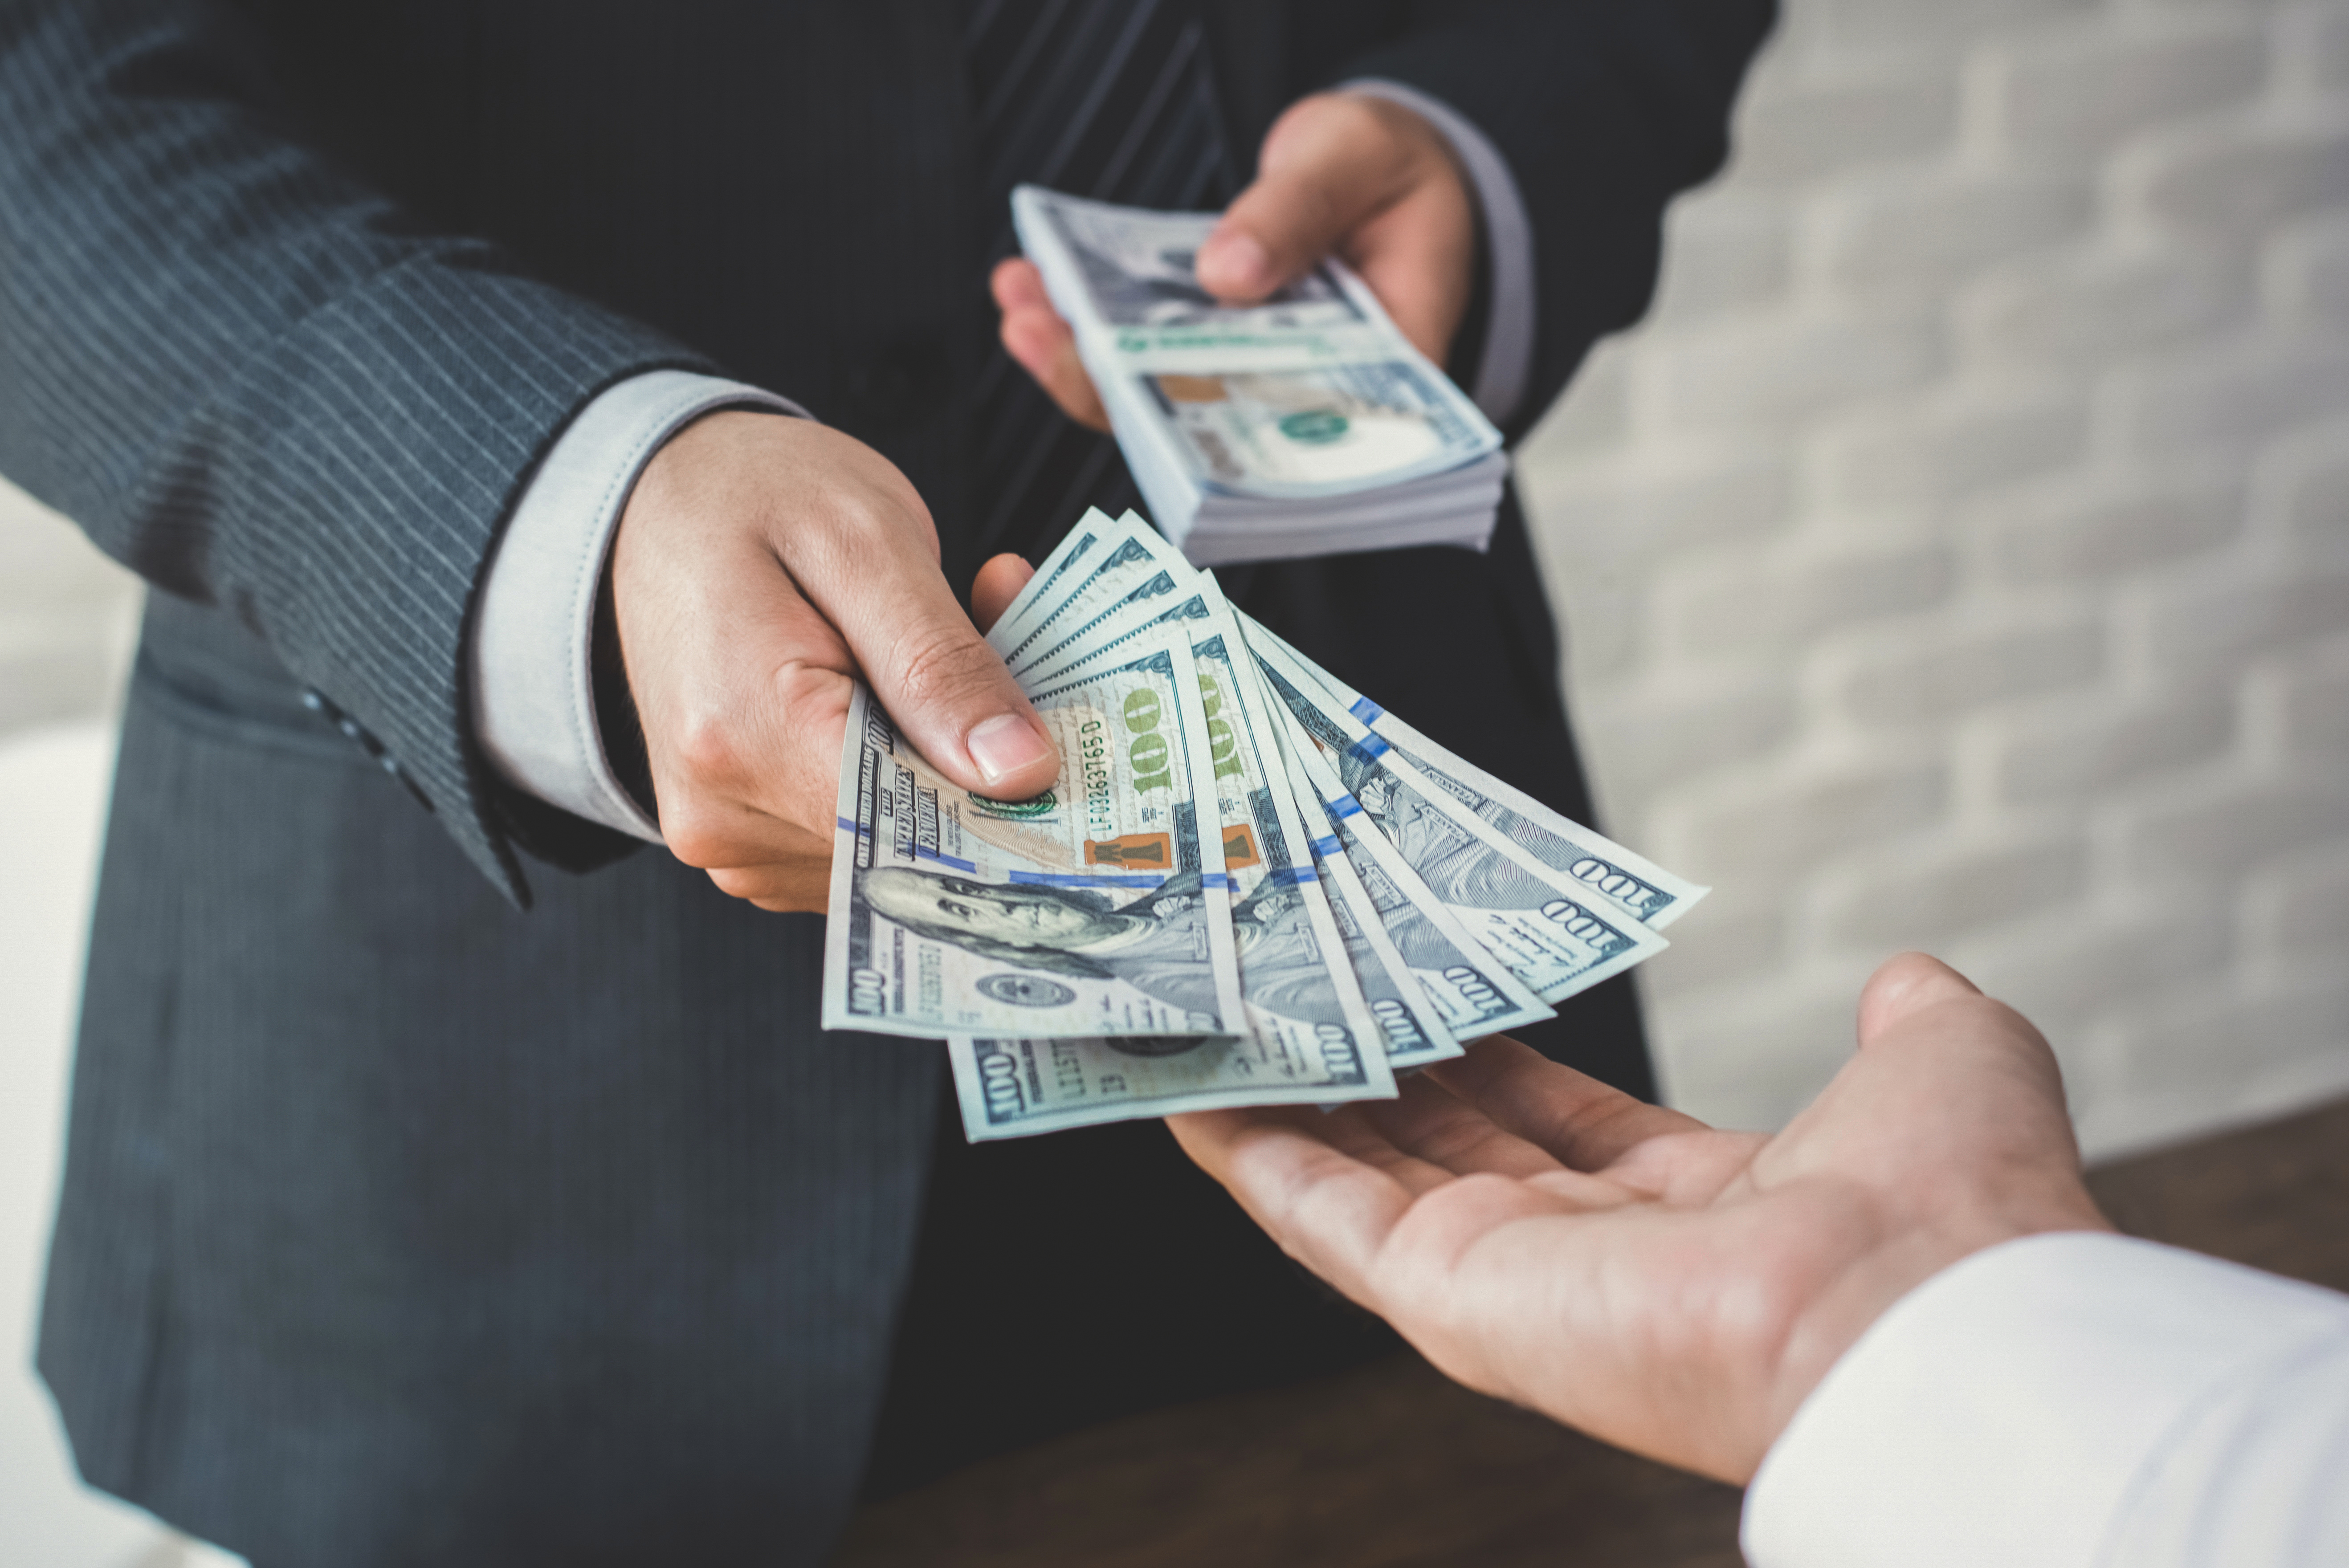 Businessman giving or paying money to a man, US dollar bills - loan,bribery and financial concepts